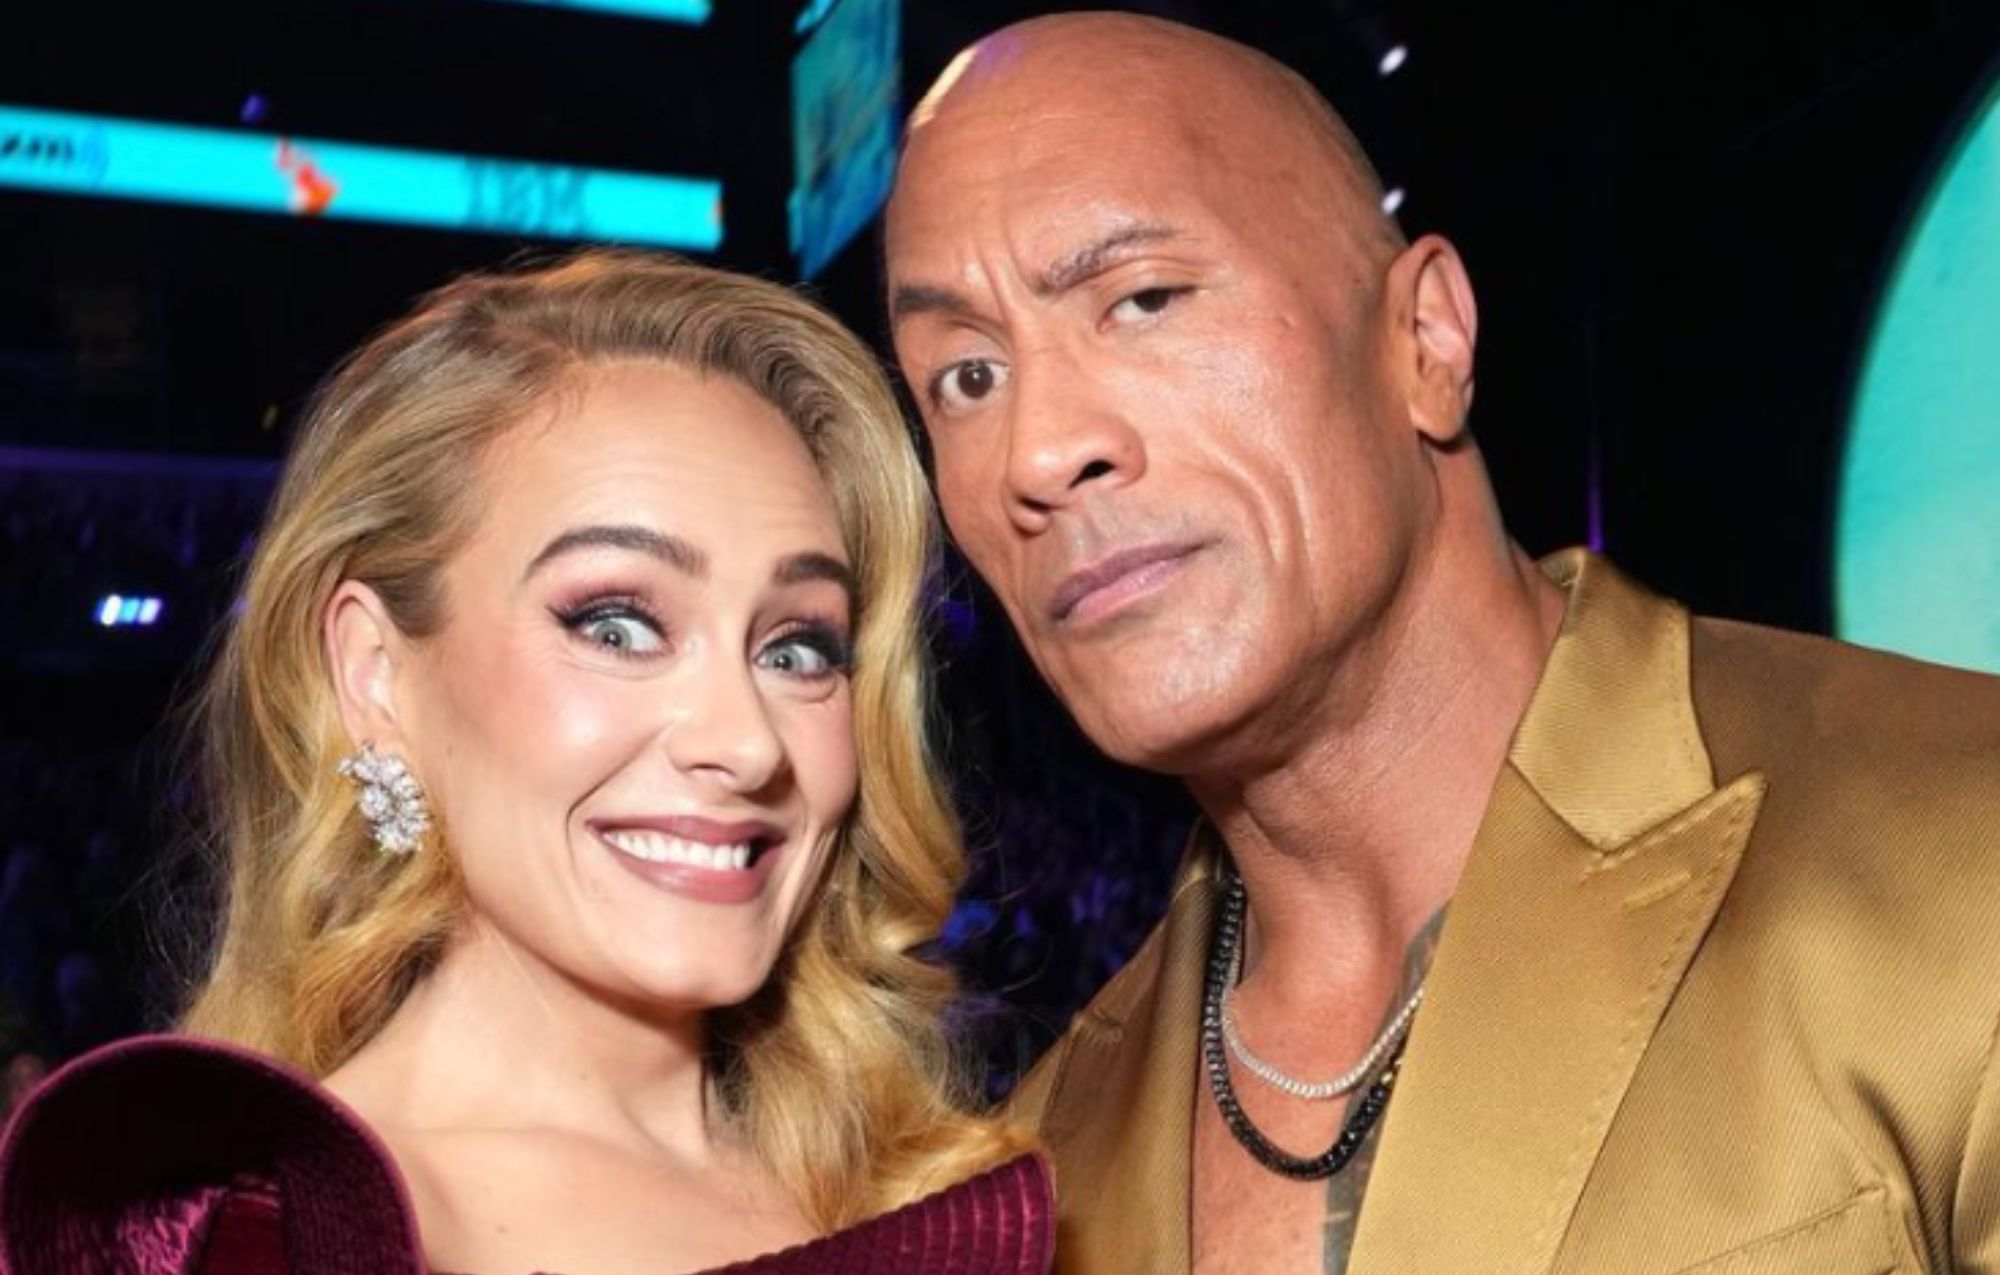 Dwayne Johnson reveals “great lengths” he went to surprise Adele at Grammys